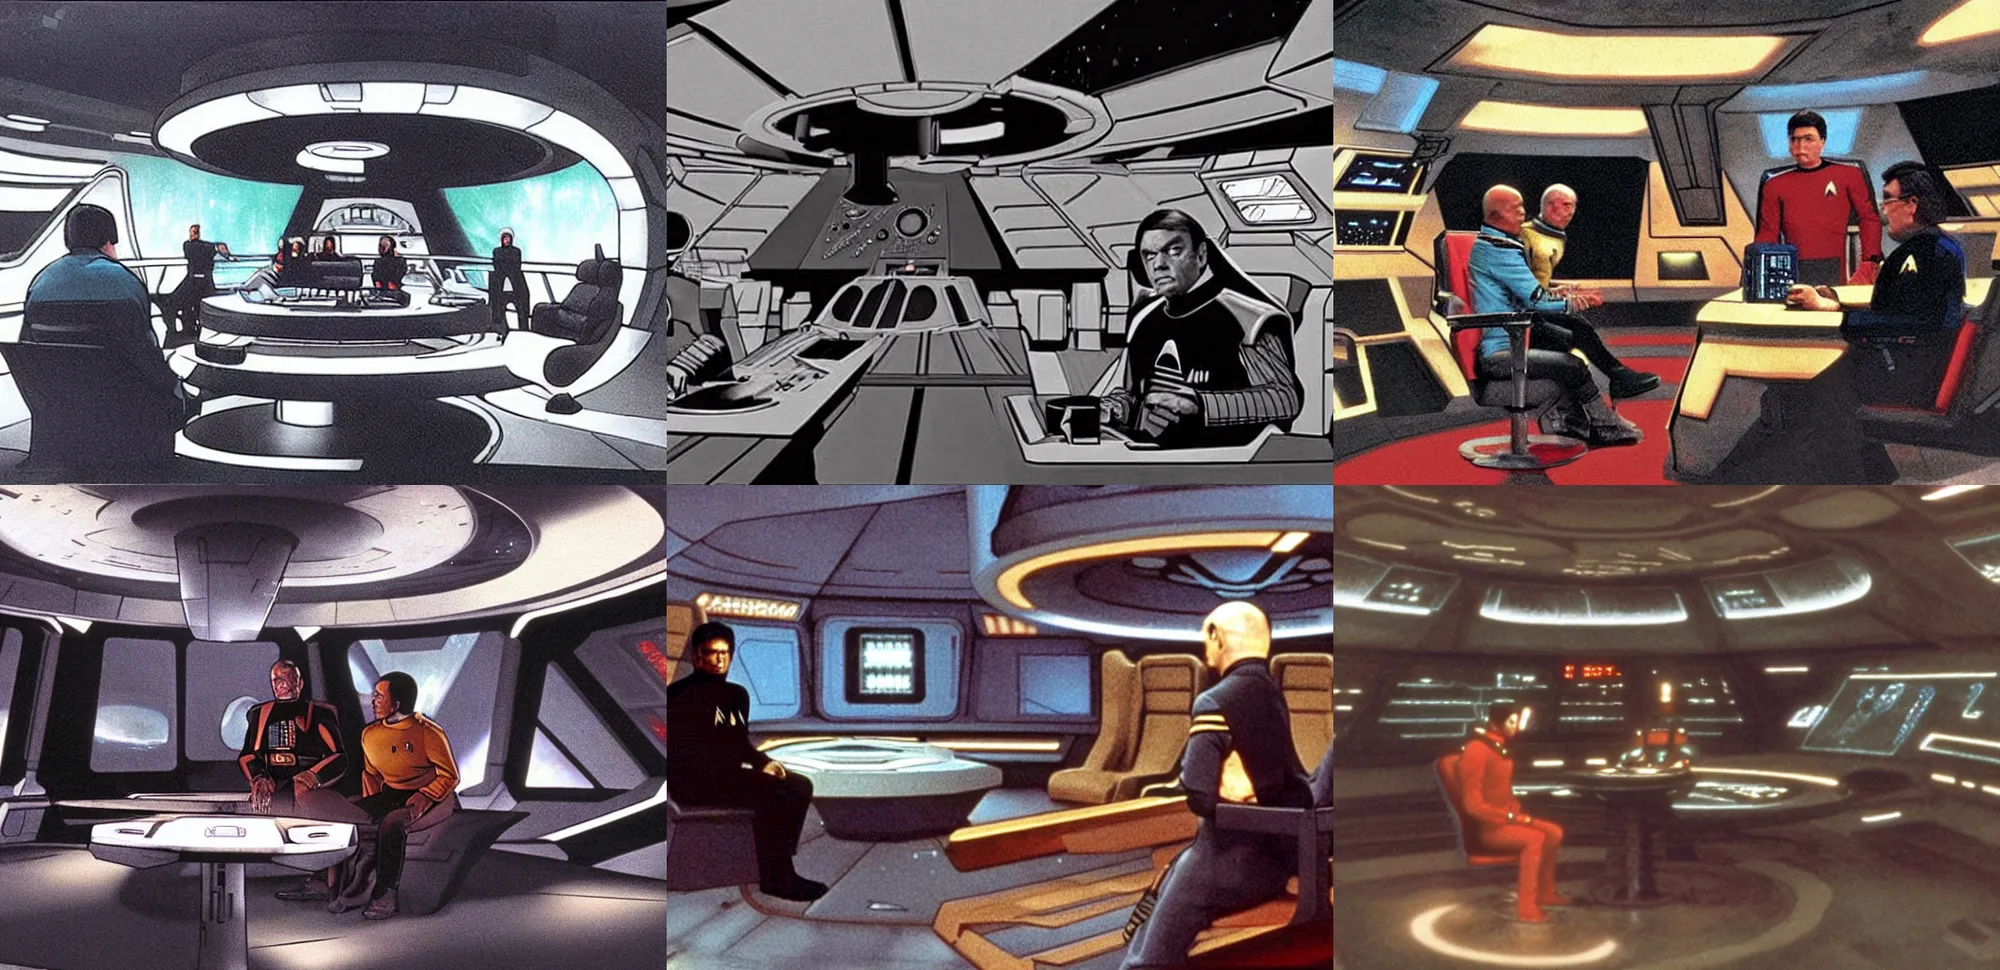 Prompt: Scene from Star Trek The Next Generation showing the deck of the Starship Enterprise with Darth Vader from Star Wars, as the Captain, sitting in the captain's chair. concept art by Rick Sternbach, Michael Okuda, John Eaves